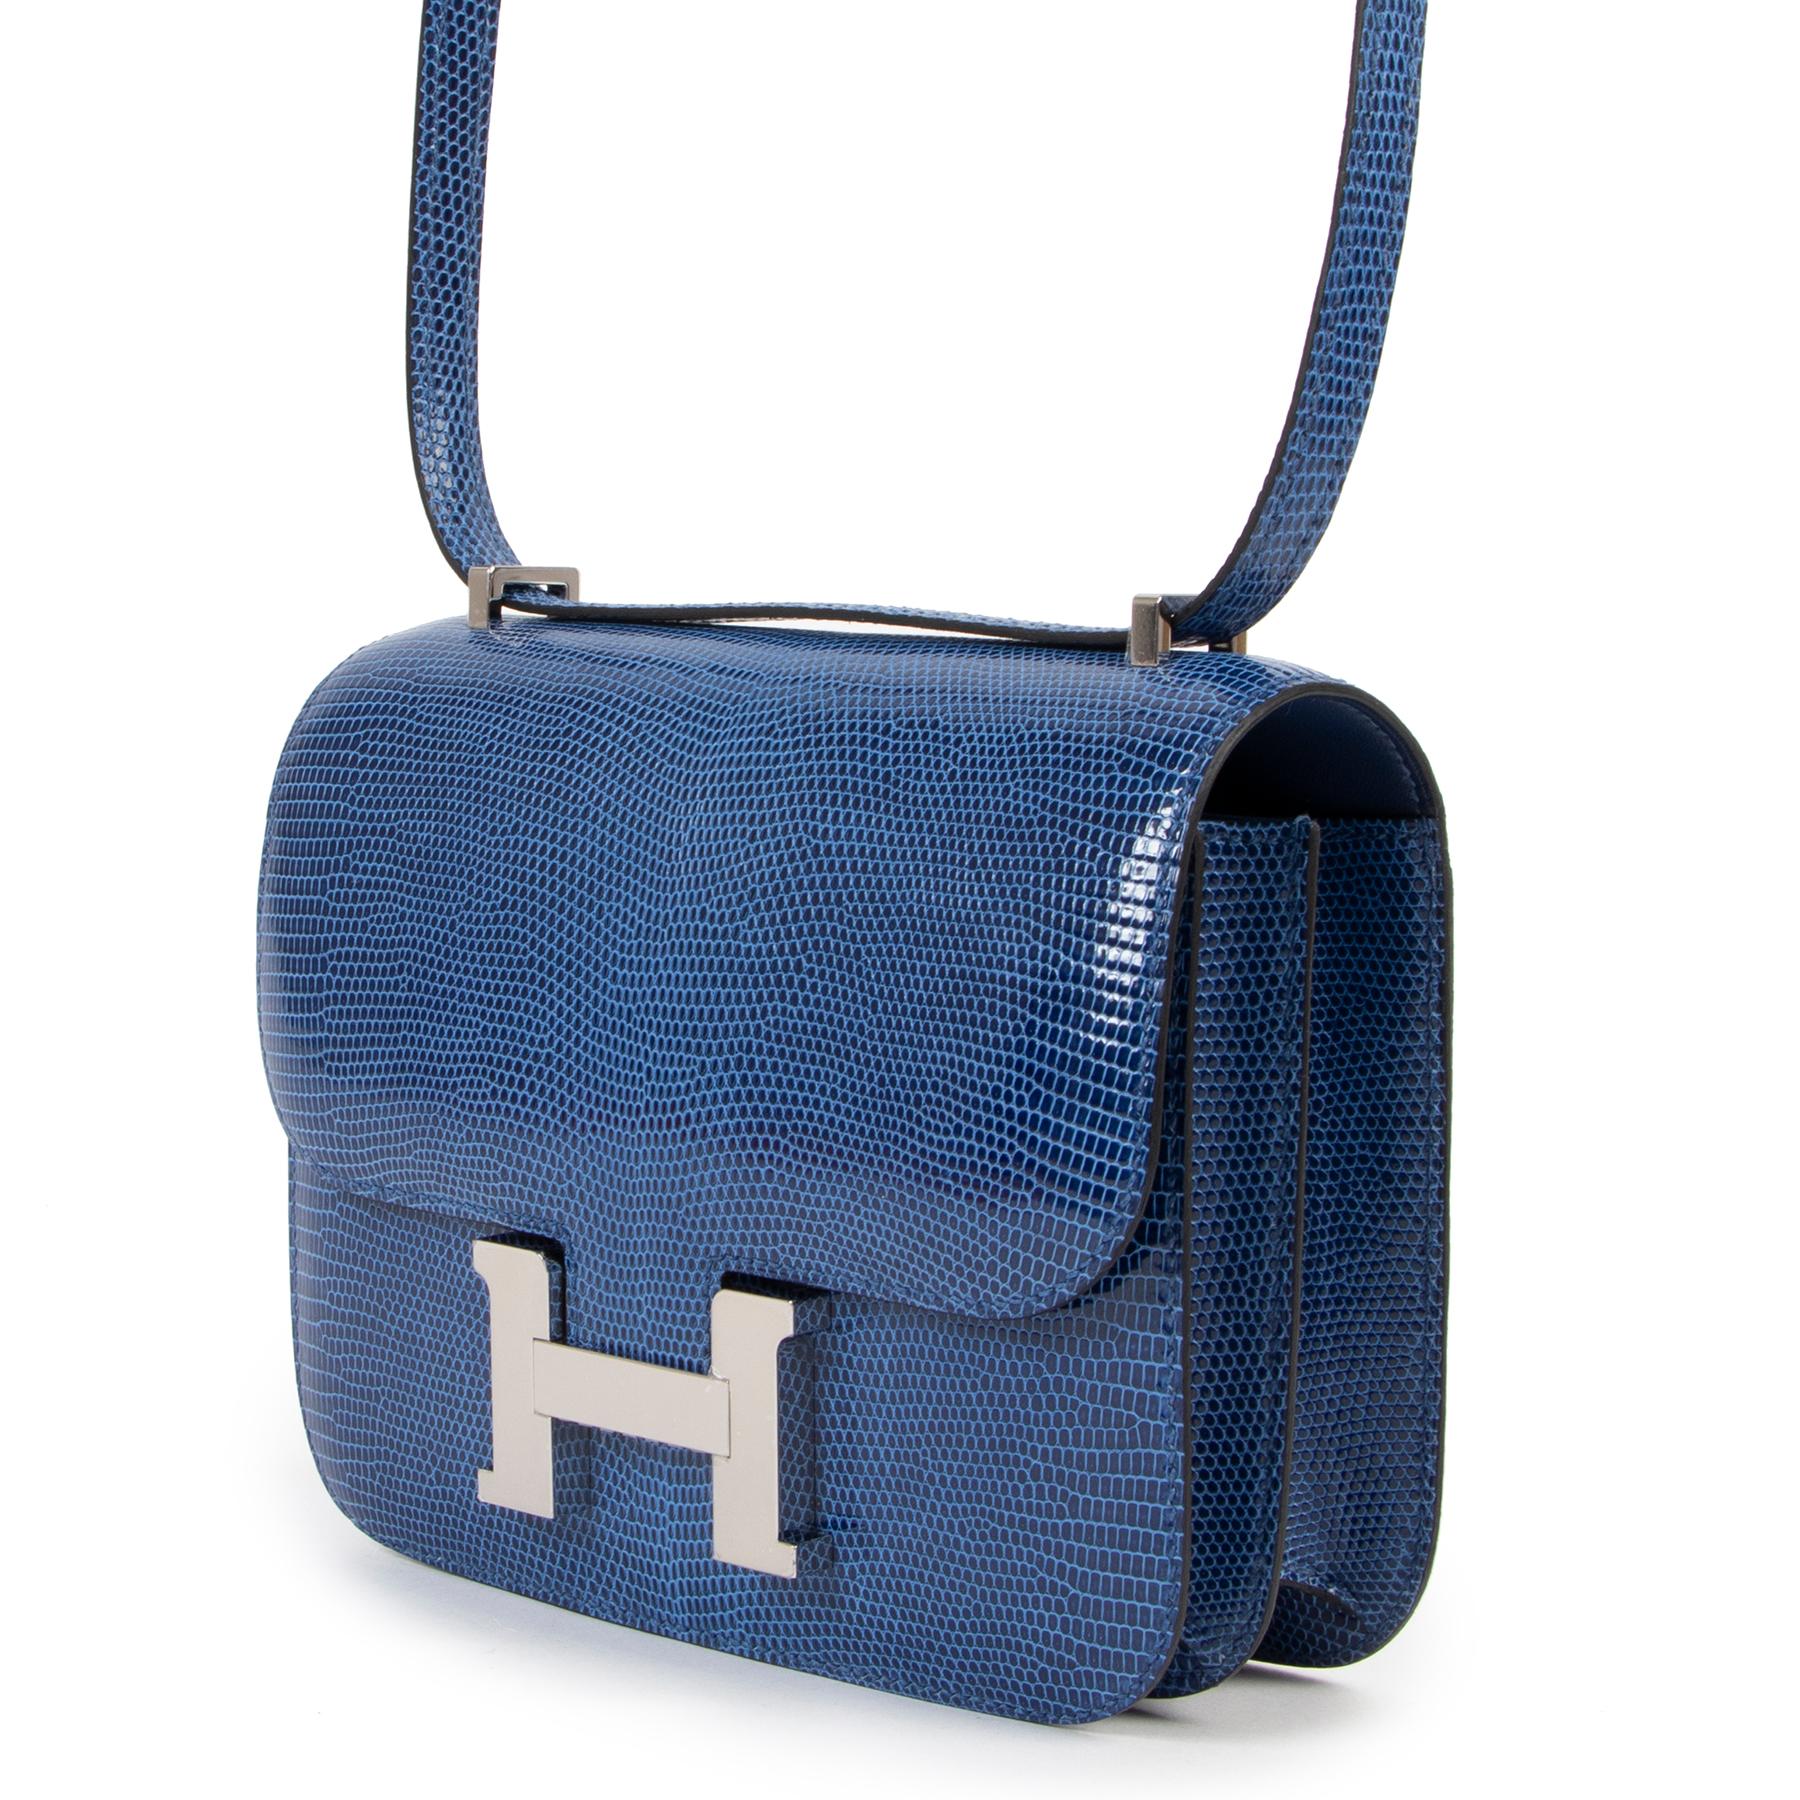 Hermès Constance Mini Bleu Saphir Lizard Niloticus Lisse PHW

Impossible to get, this Hermès Constance Mini is special in so many ways not the least of which is the shiny Lizard leather it’s been made of. Finished in eye-catching 